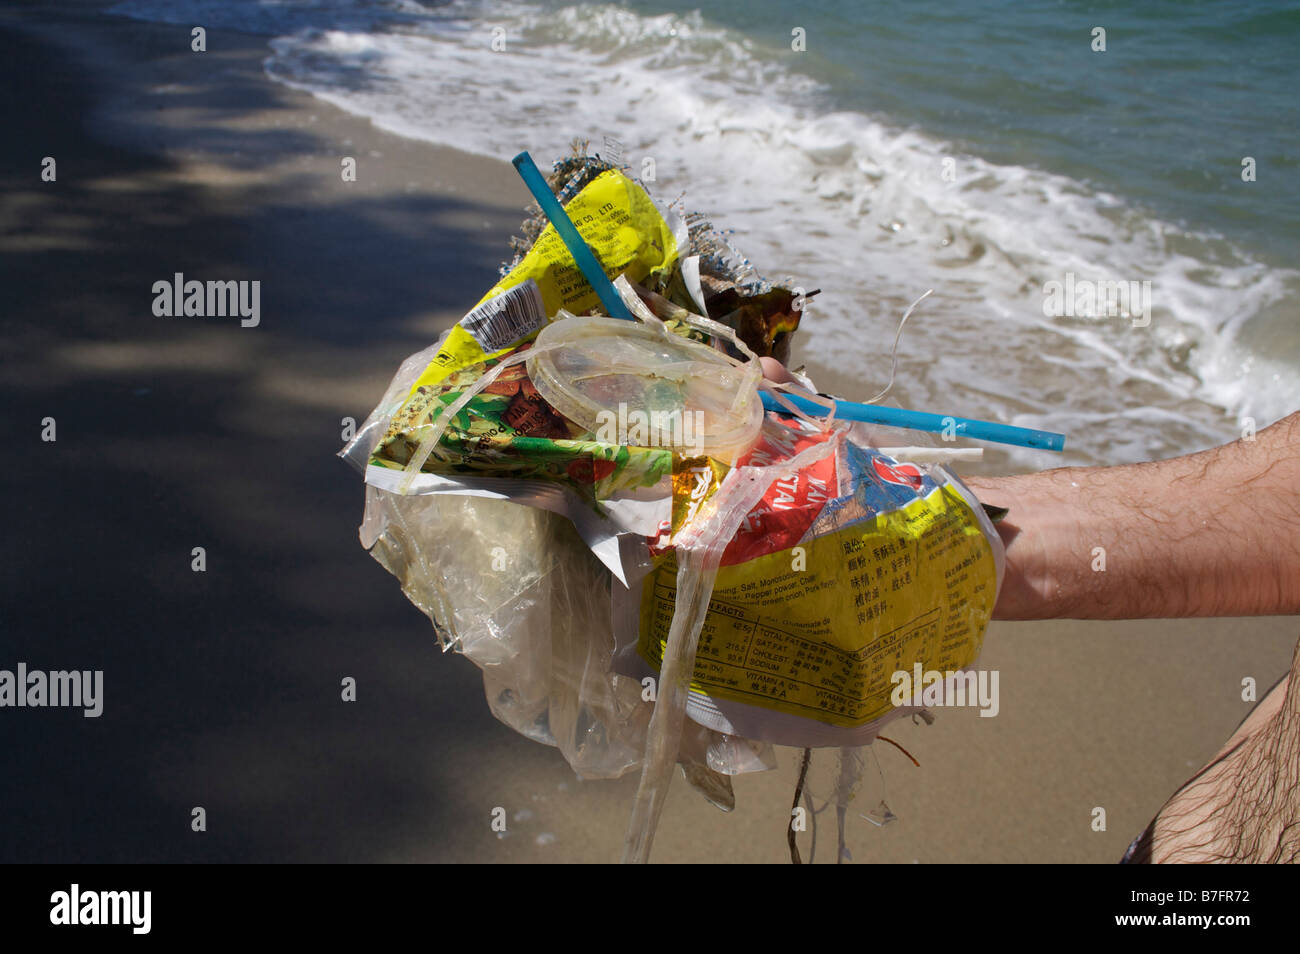 Man holding rubbish collected from the sea during a swim. Stock Photo